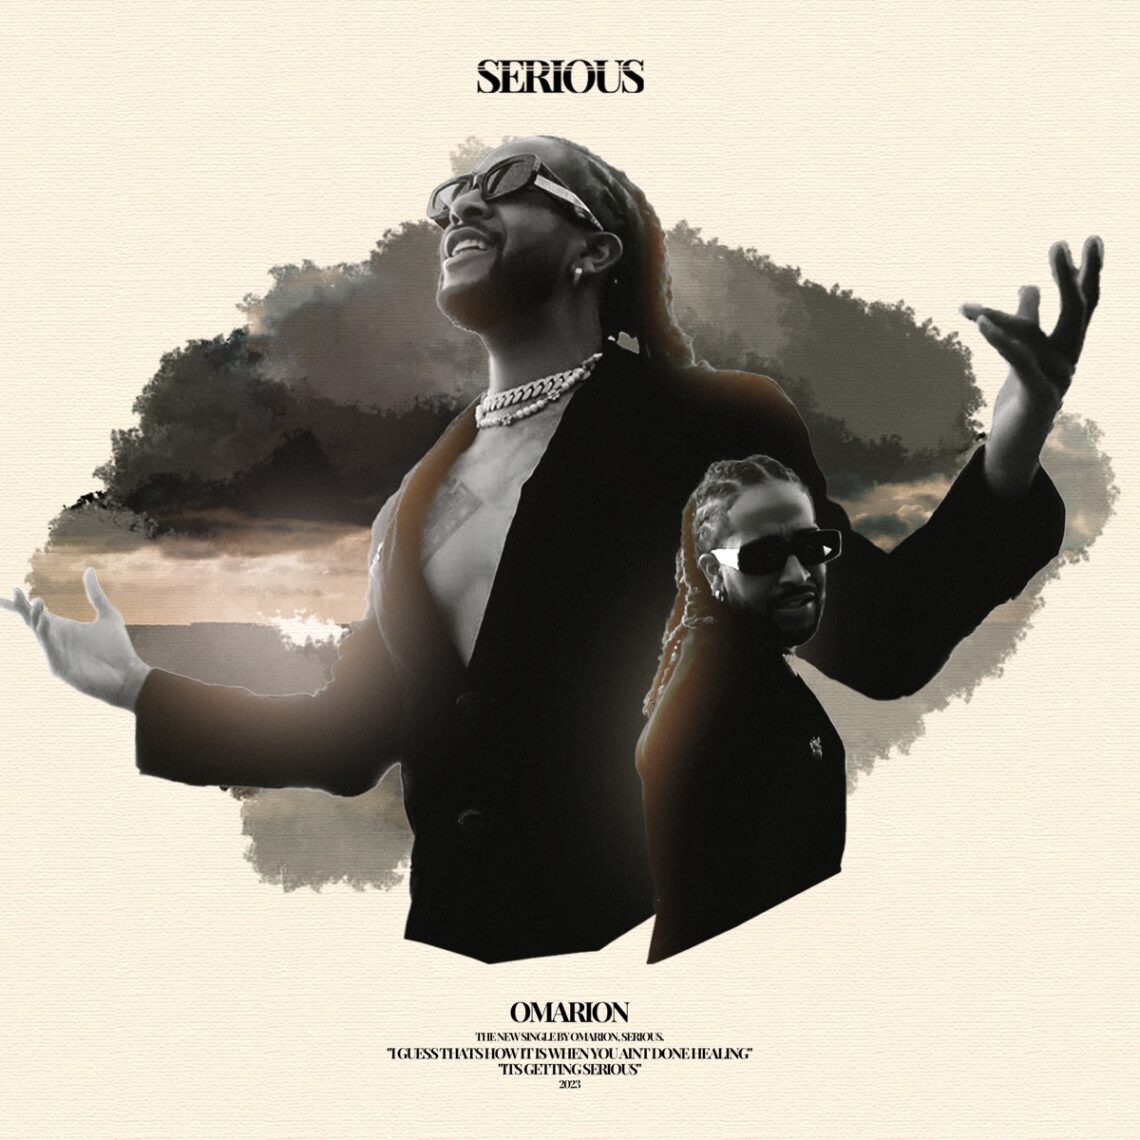 Omarion — Serious cover artwork